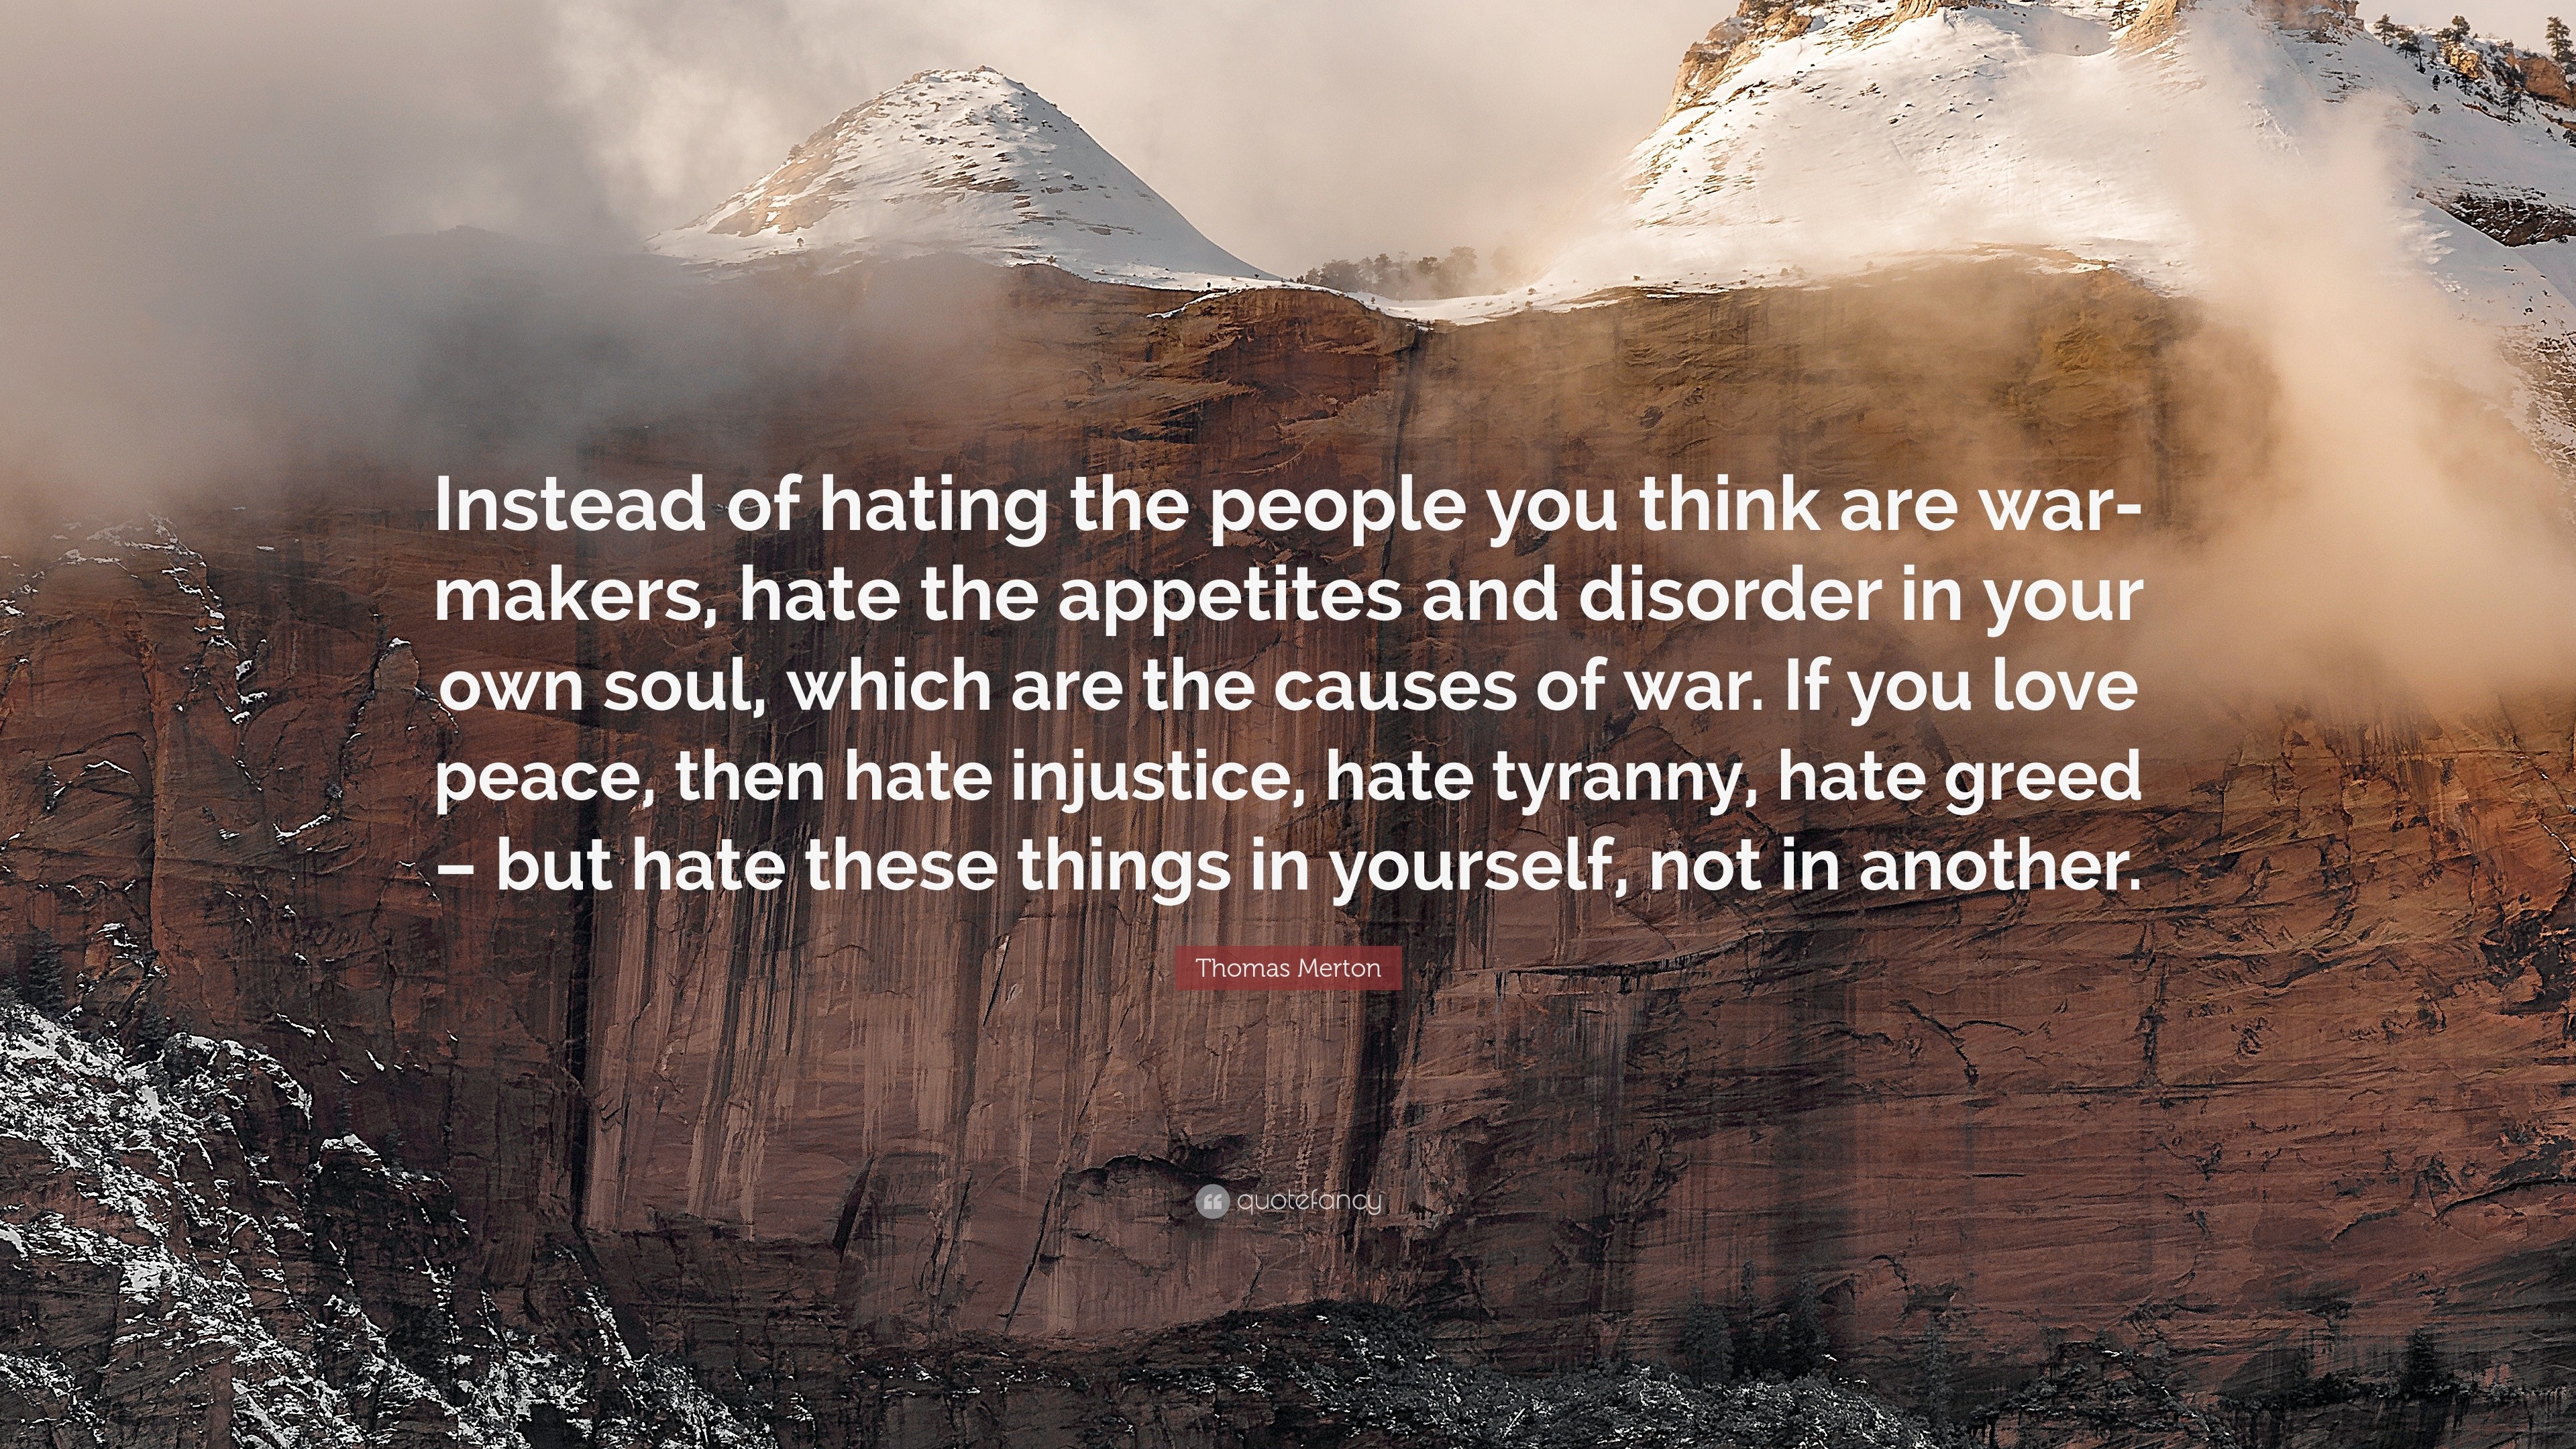 Thomas Merton Quote “Instead of hating the people you think are war makers